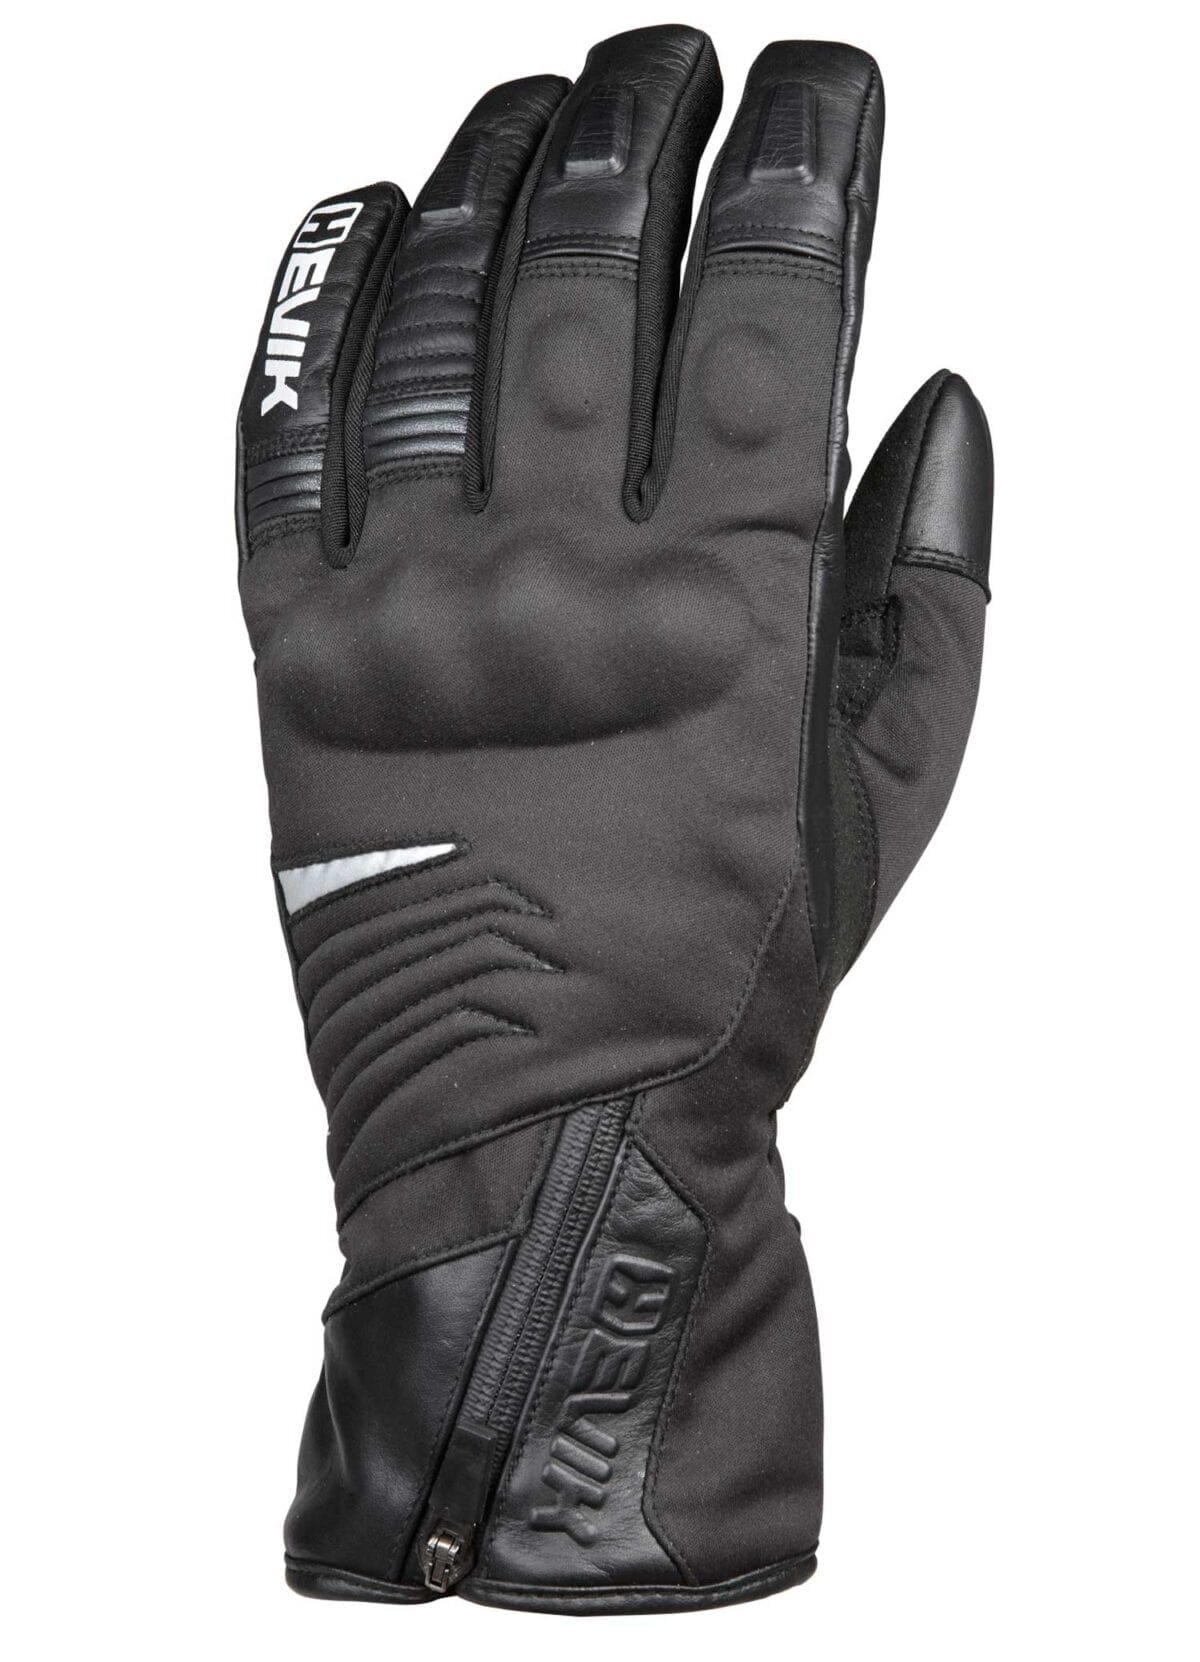 New winter motorcycle gloves from Hevik MoreBikes